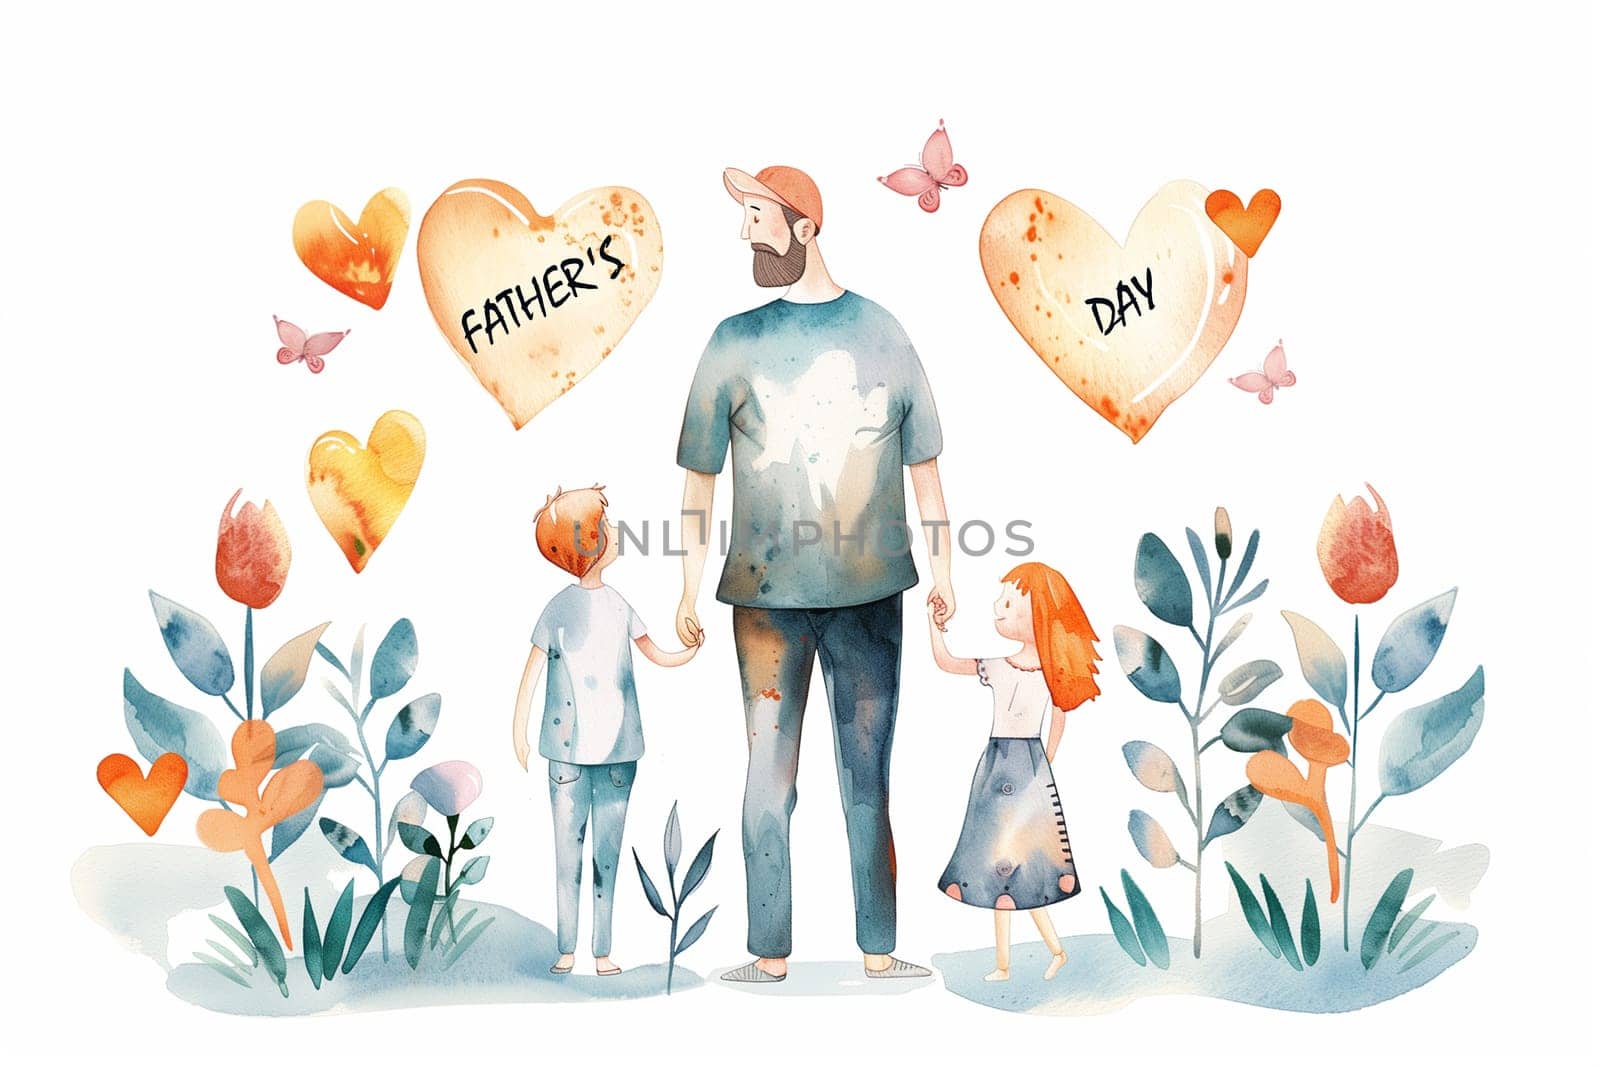 A Father and Daughter Holding Hands in Watercolor by Sd28DimoN_1976